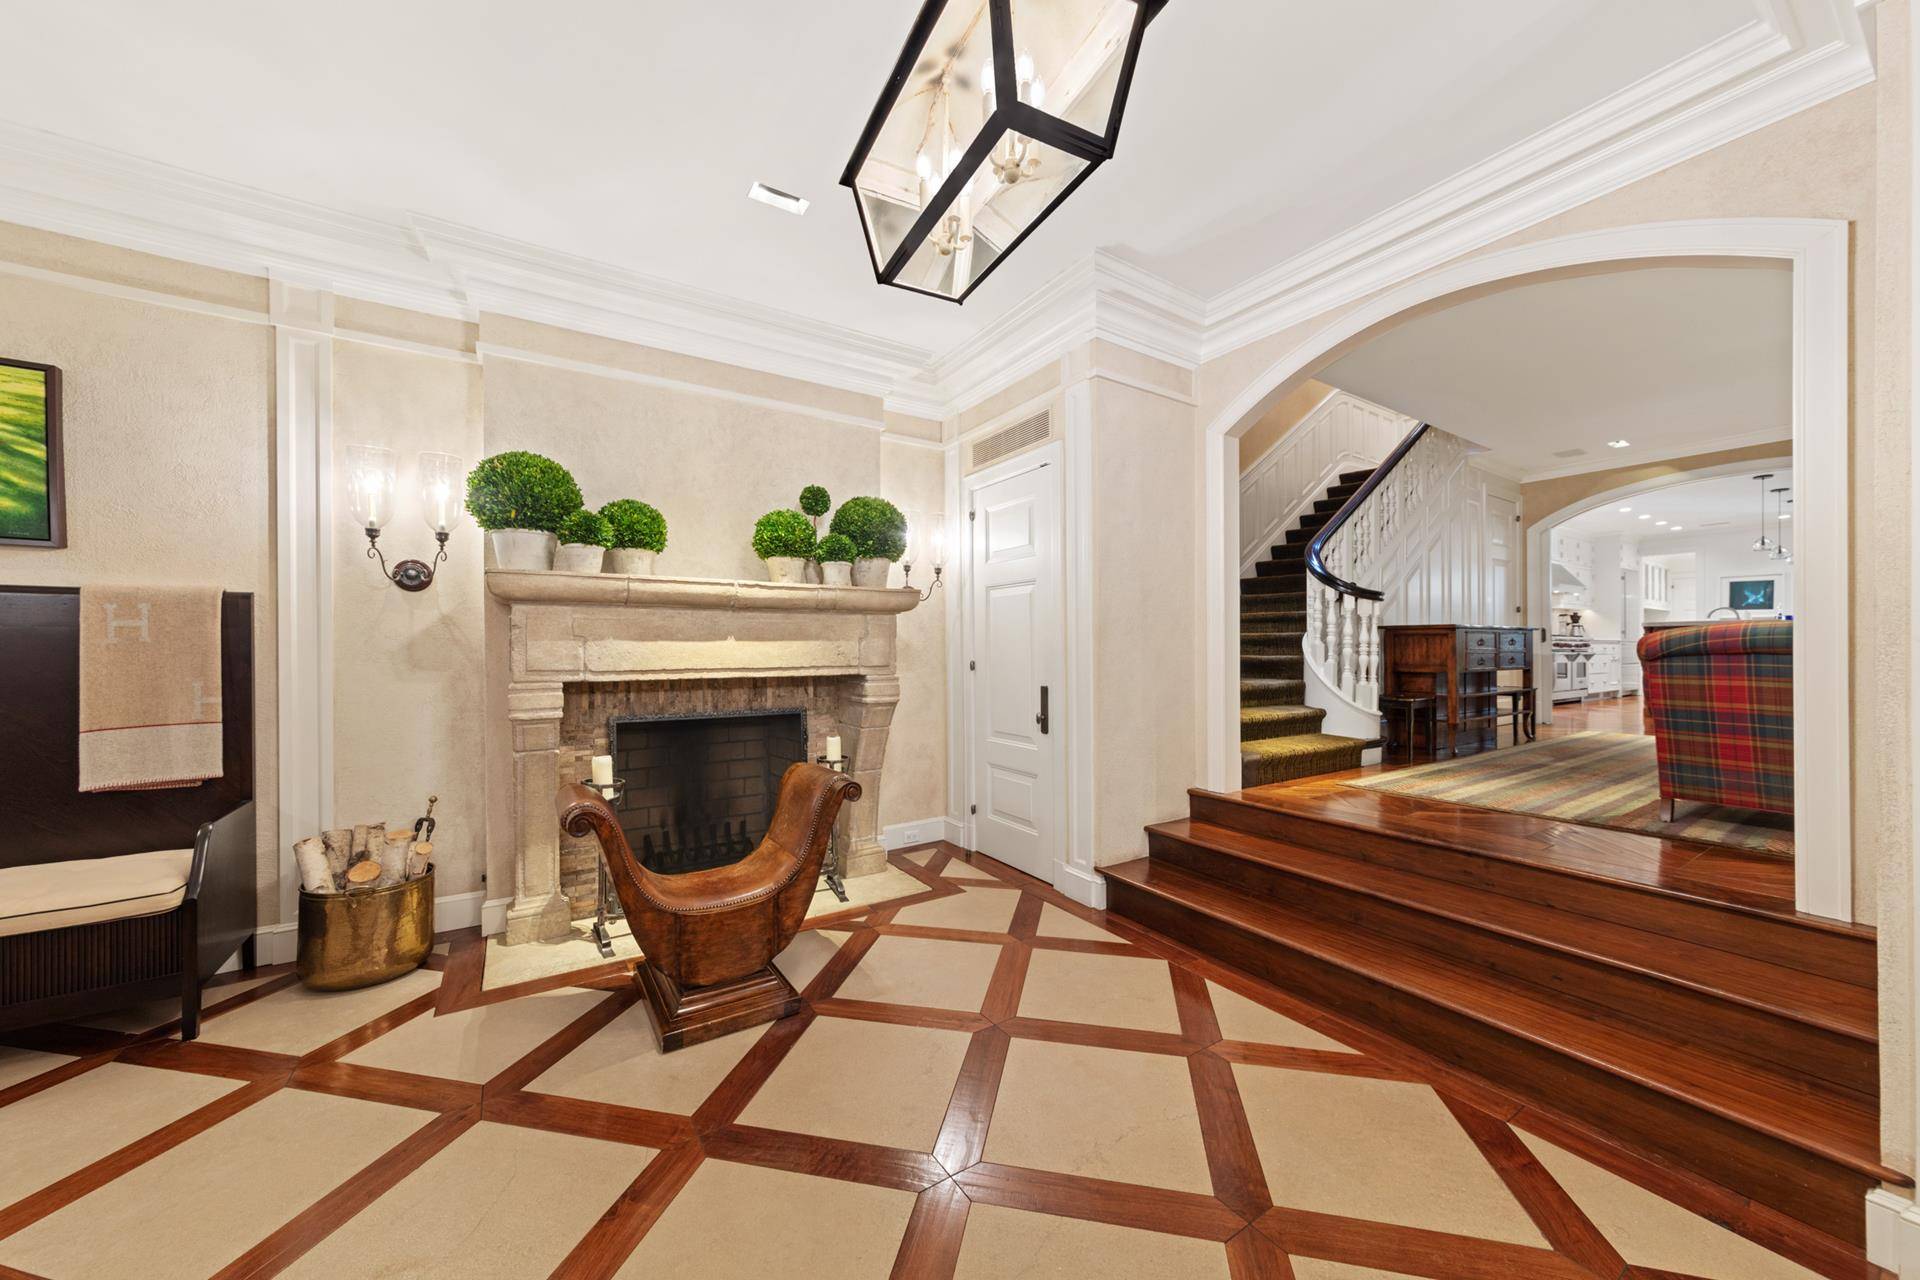 The benchmark for unsurpassed parkside living lies beyond the beautiful character facade of this landmark five story brownstone residence, merging heritage elegance and sophisticated contemporary design.